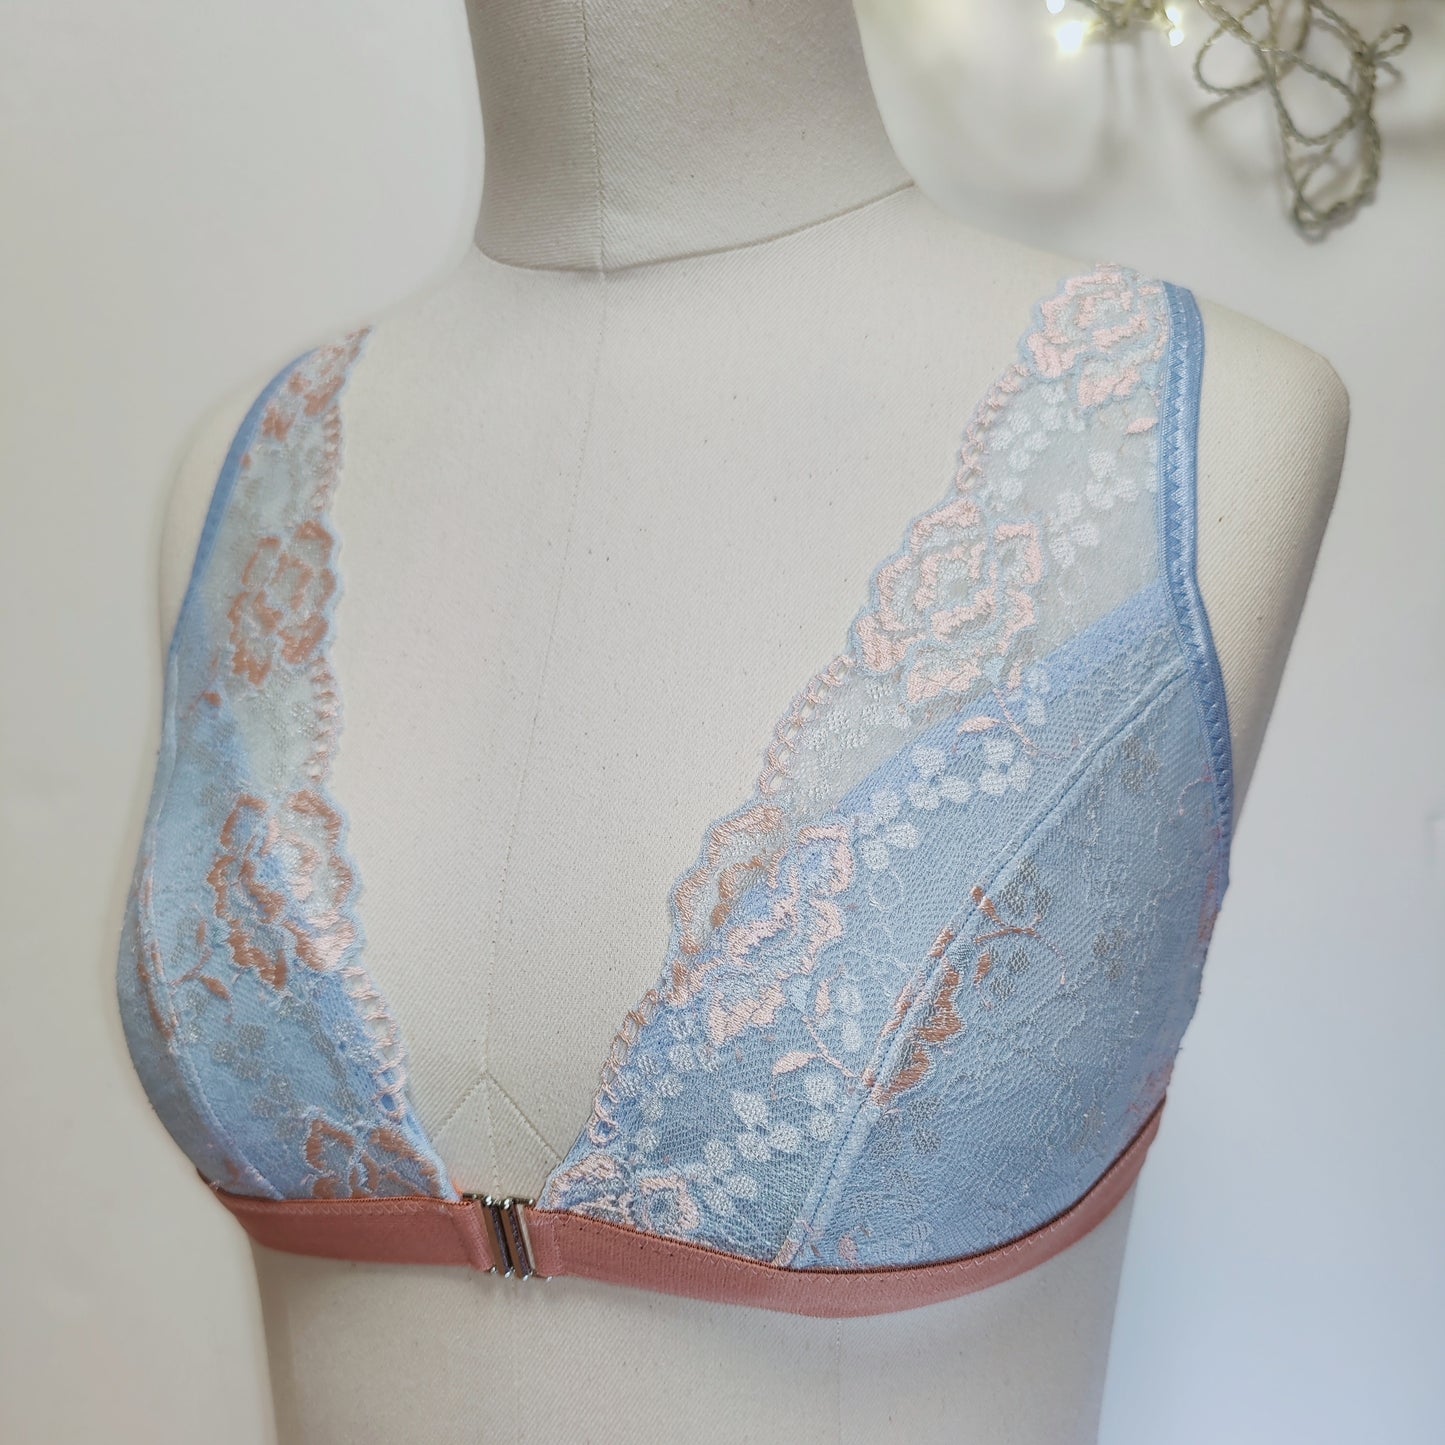 Sewing set for bralette Vanessa / sewing set with <tc>lace</tc> duo baby blue/baby pink floral with closure IDvx21